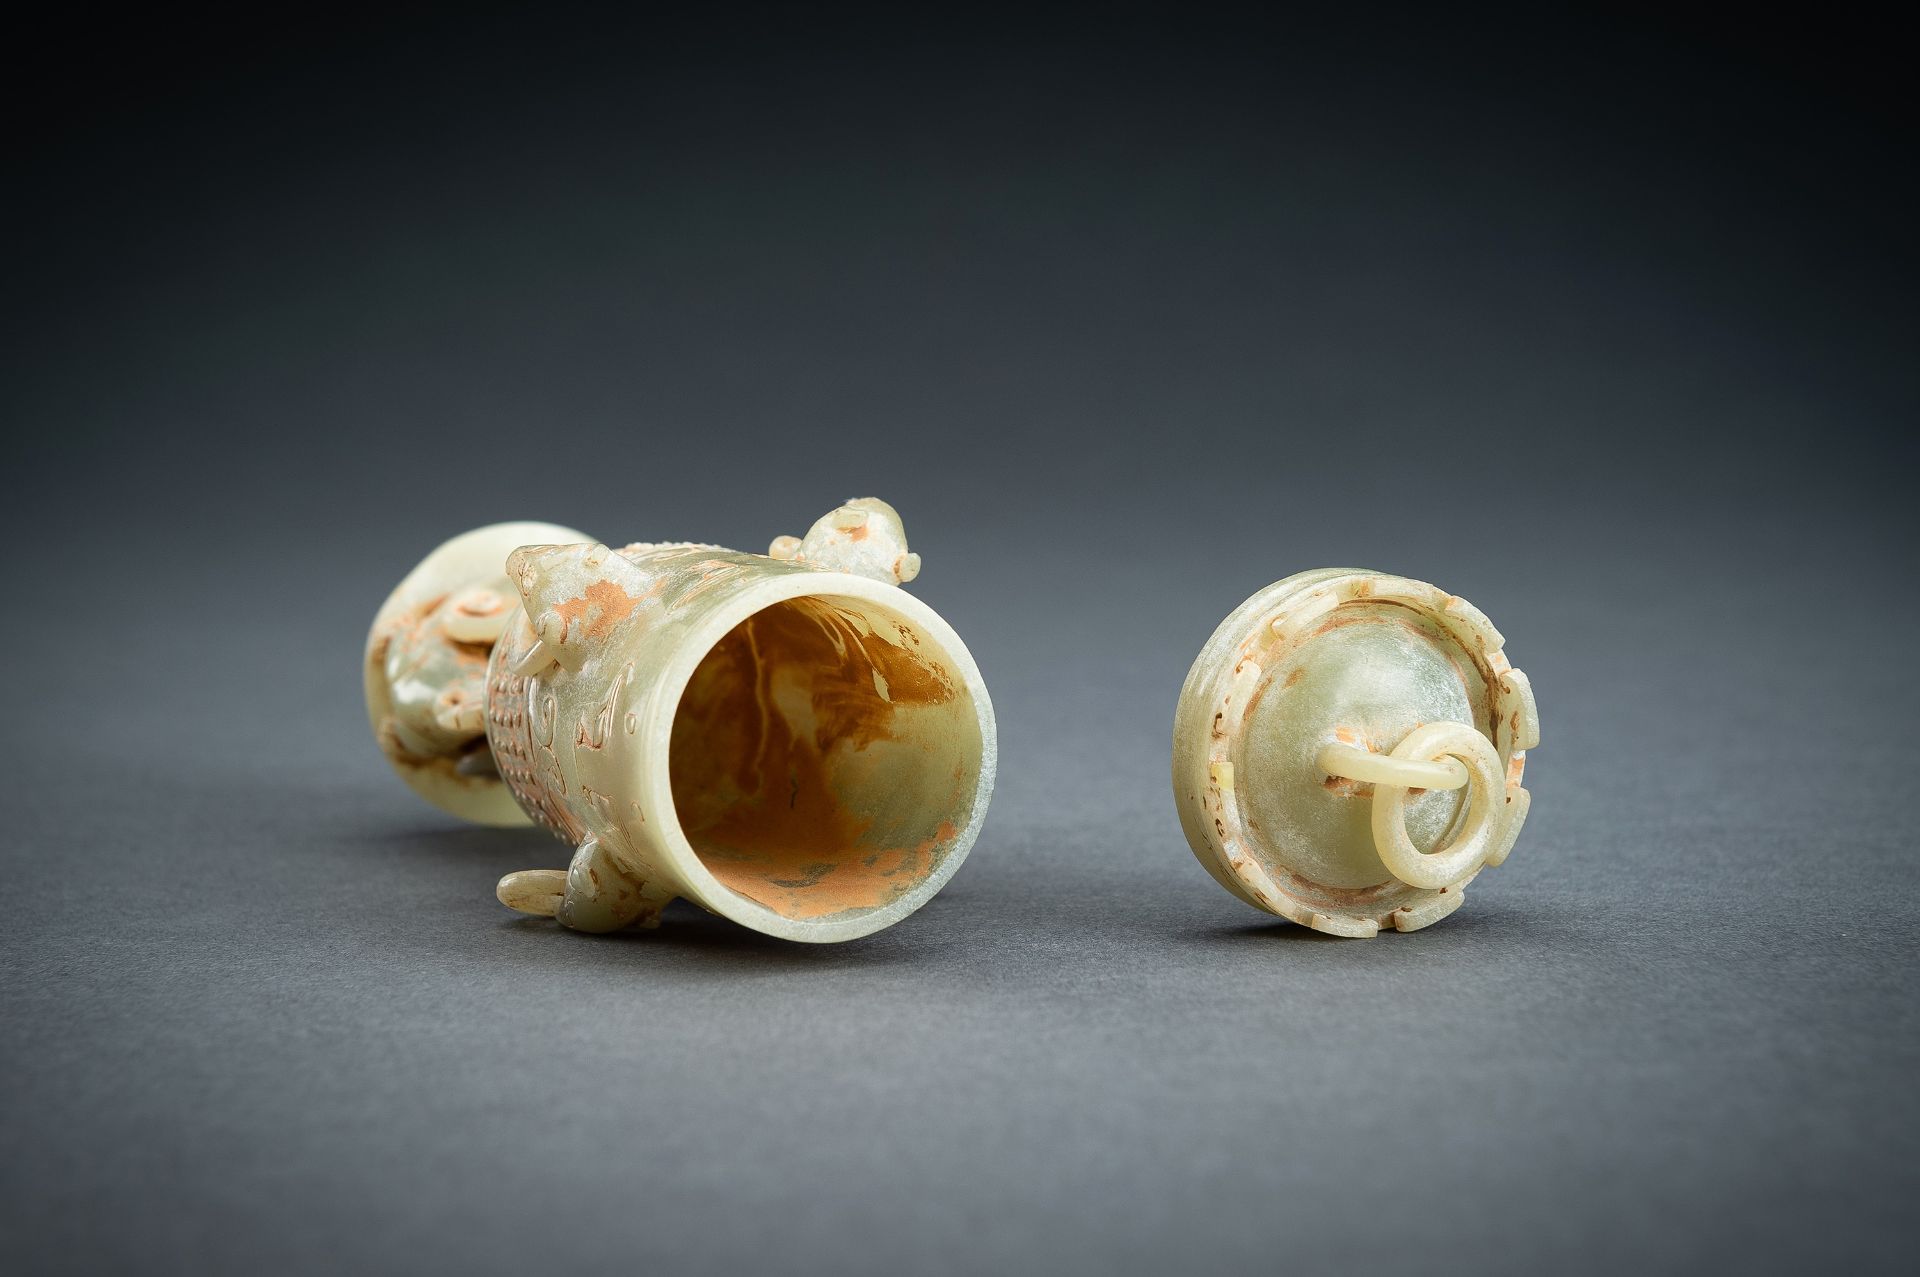 A SMALL ARCHAISTIC CELADON JADE VASE AND COVER - Image 17 of 18